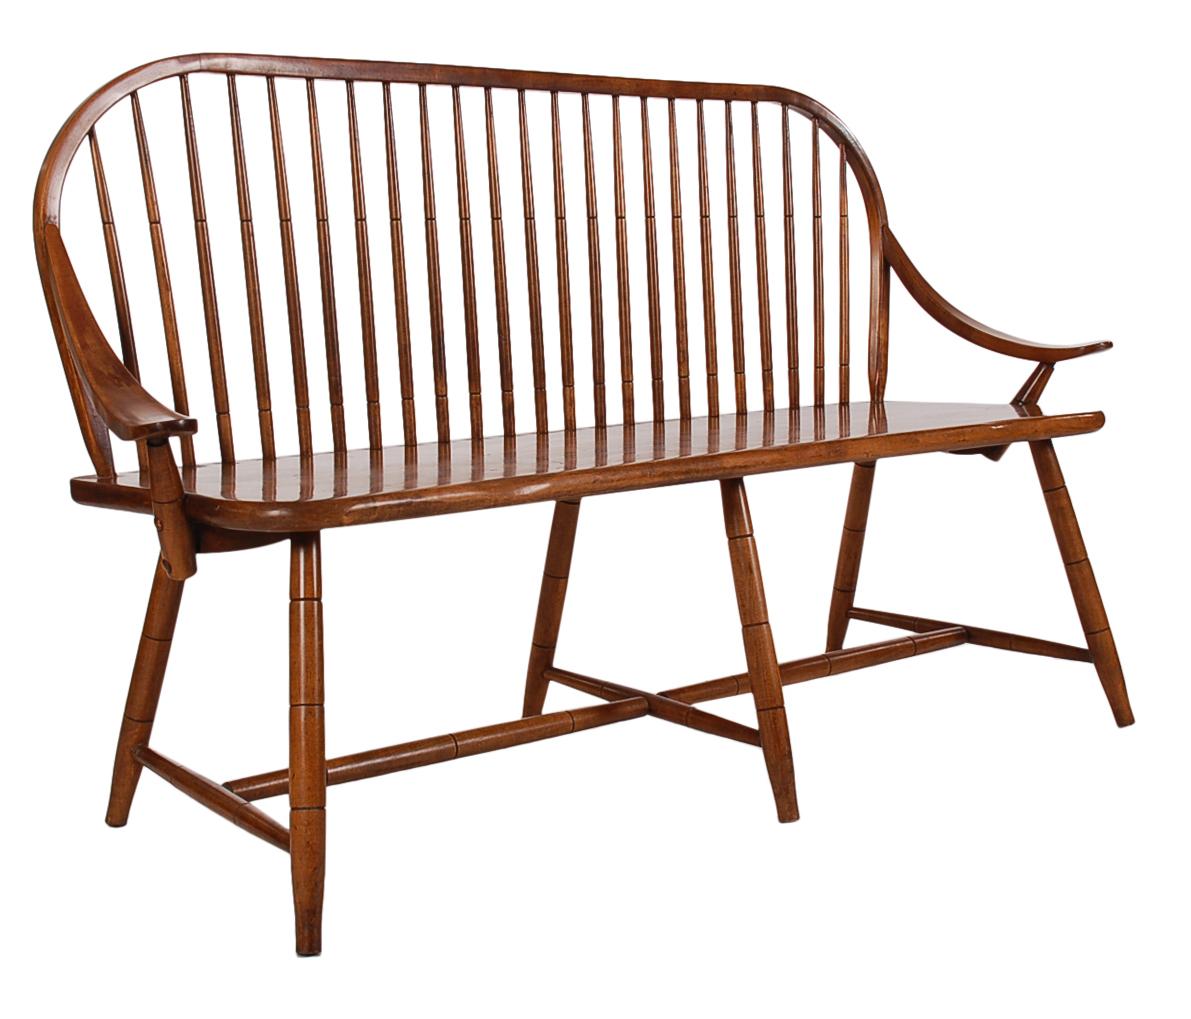 Mid-20th Century Midcentury Transitional Modern Spindle Back Bentwood Settee Bench in Walnut